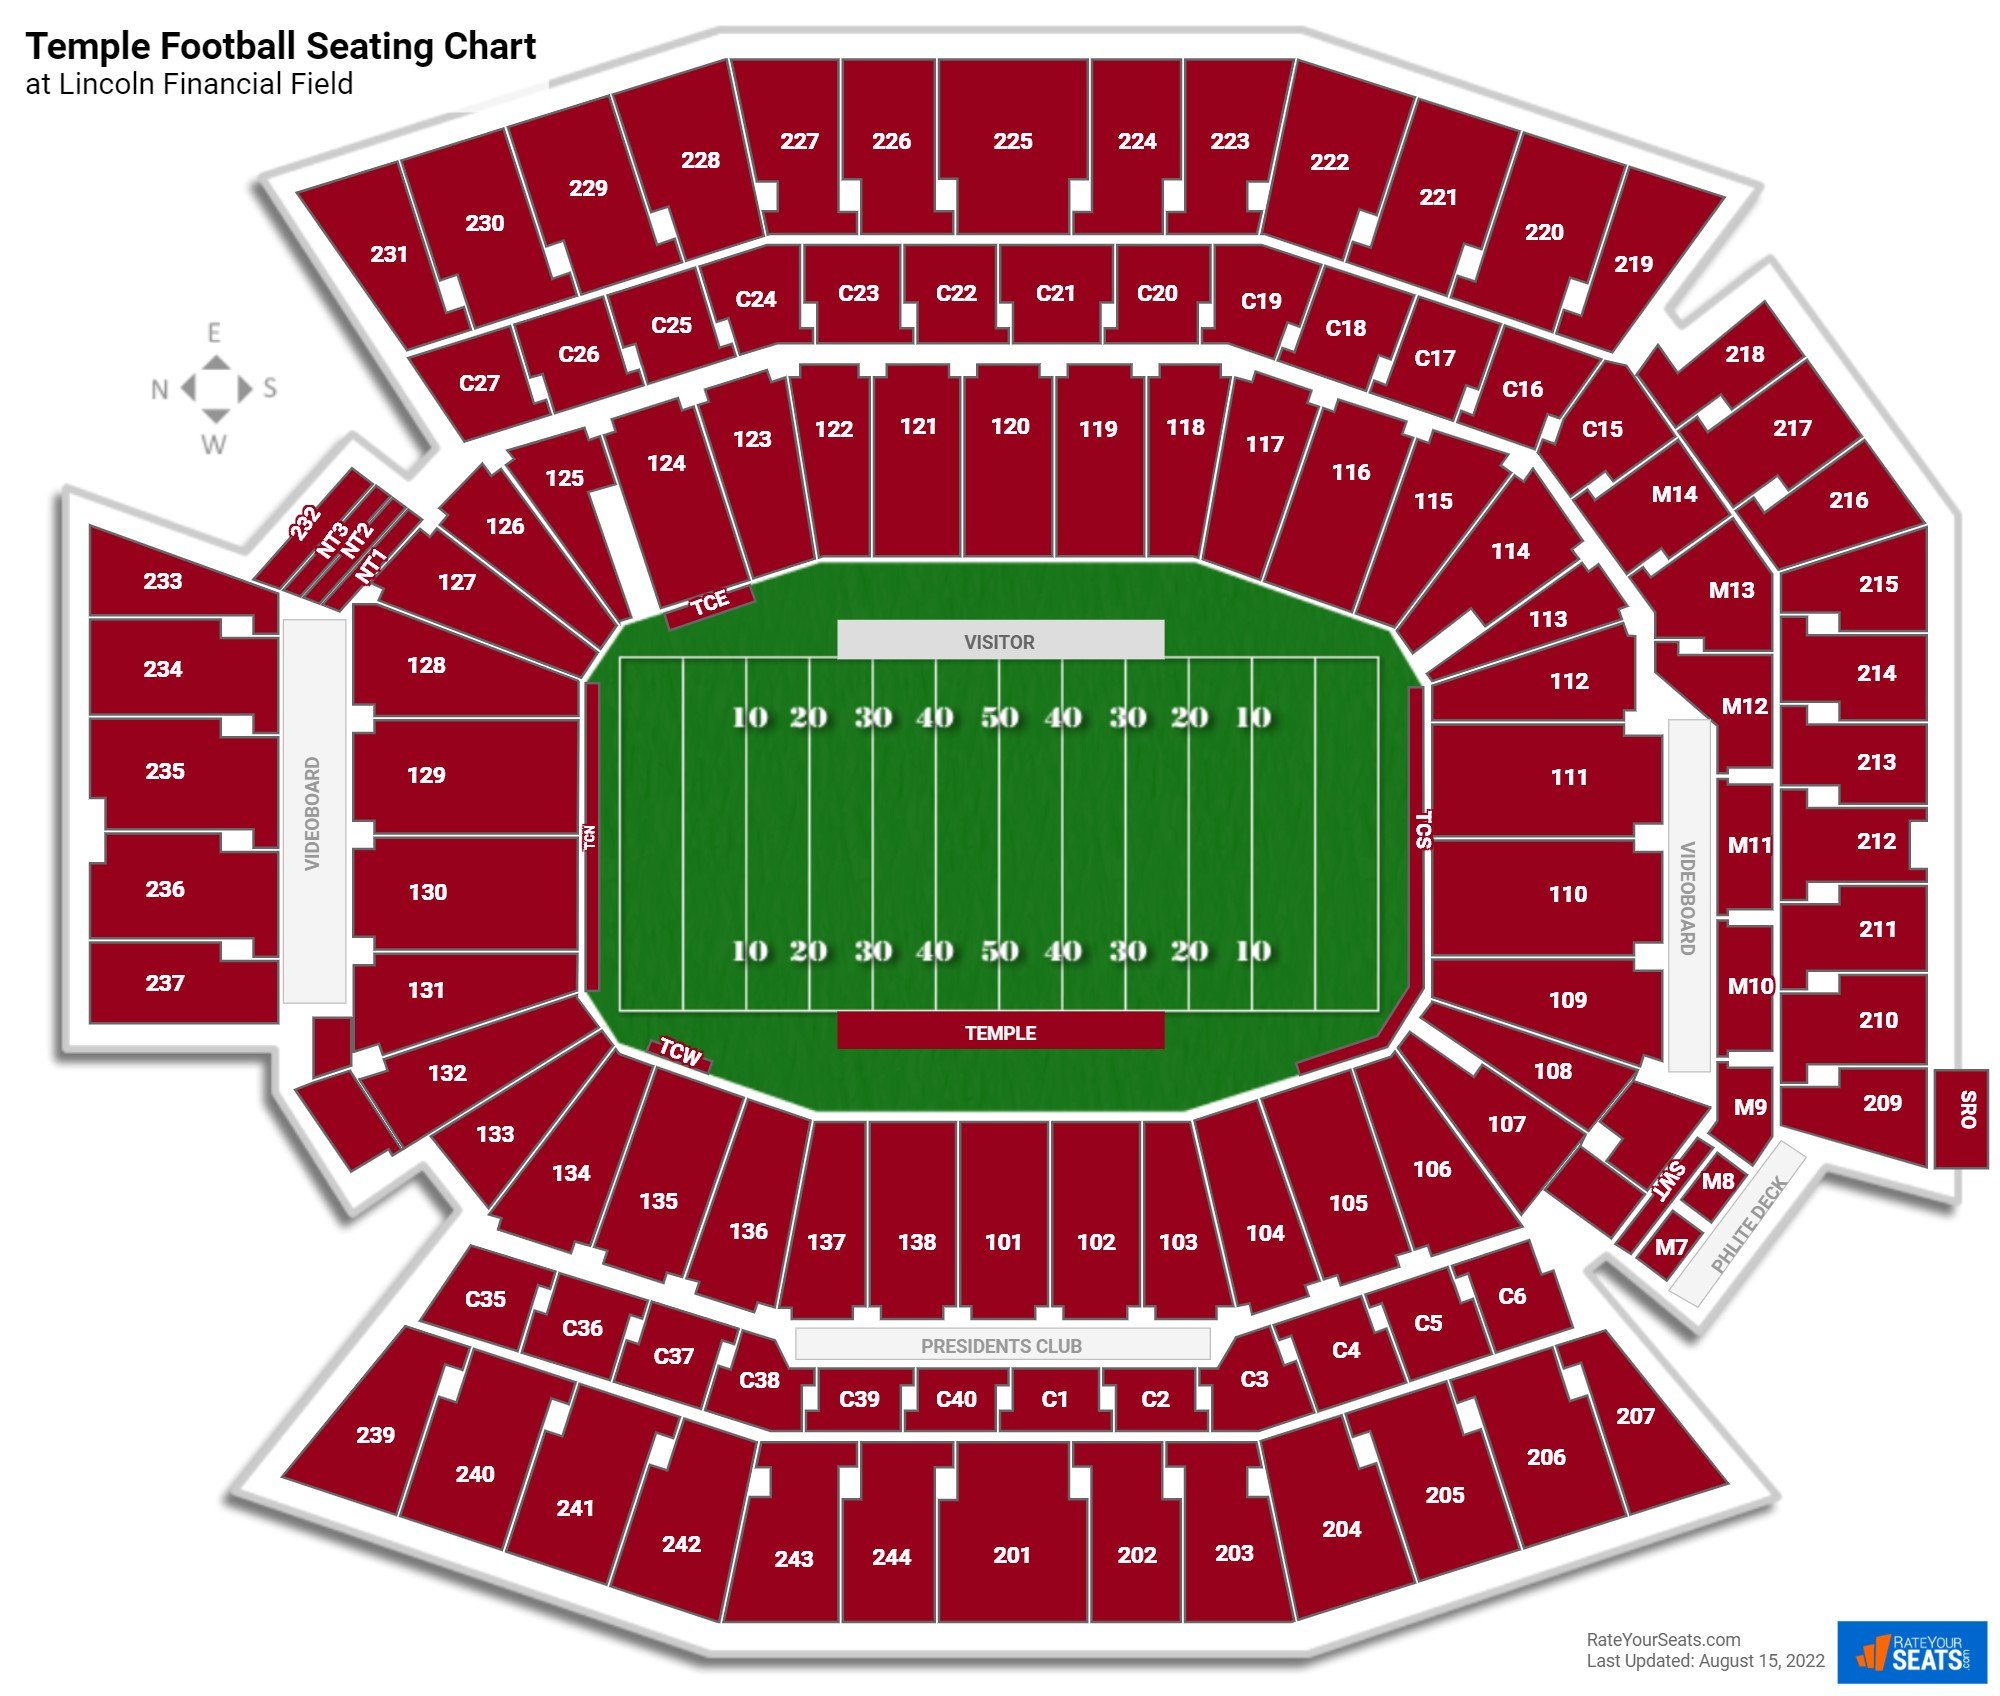 Lincoln Financial Field Seating Chart Temple Football Elcho Table